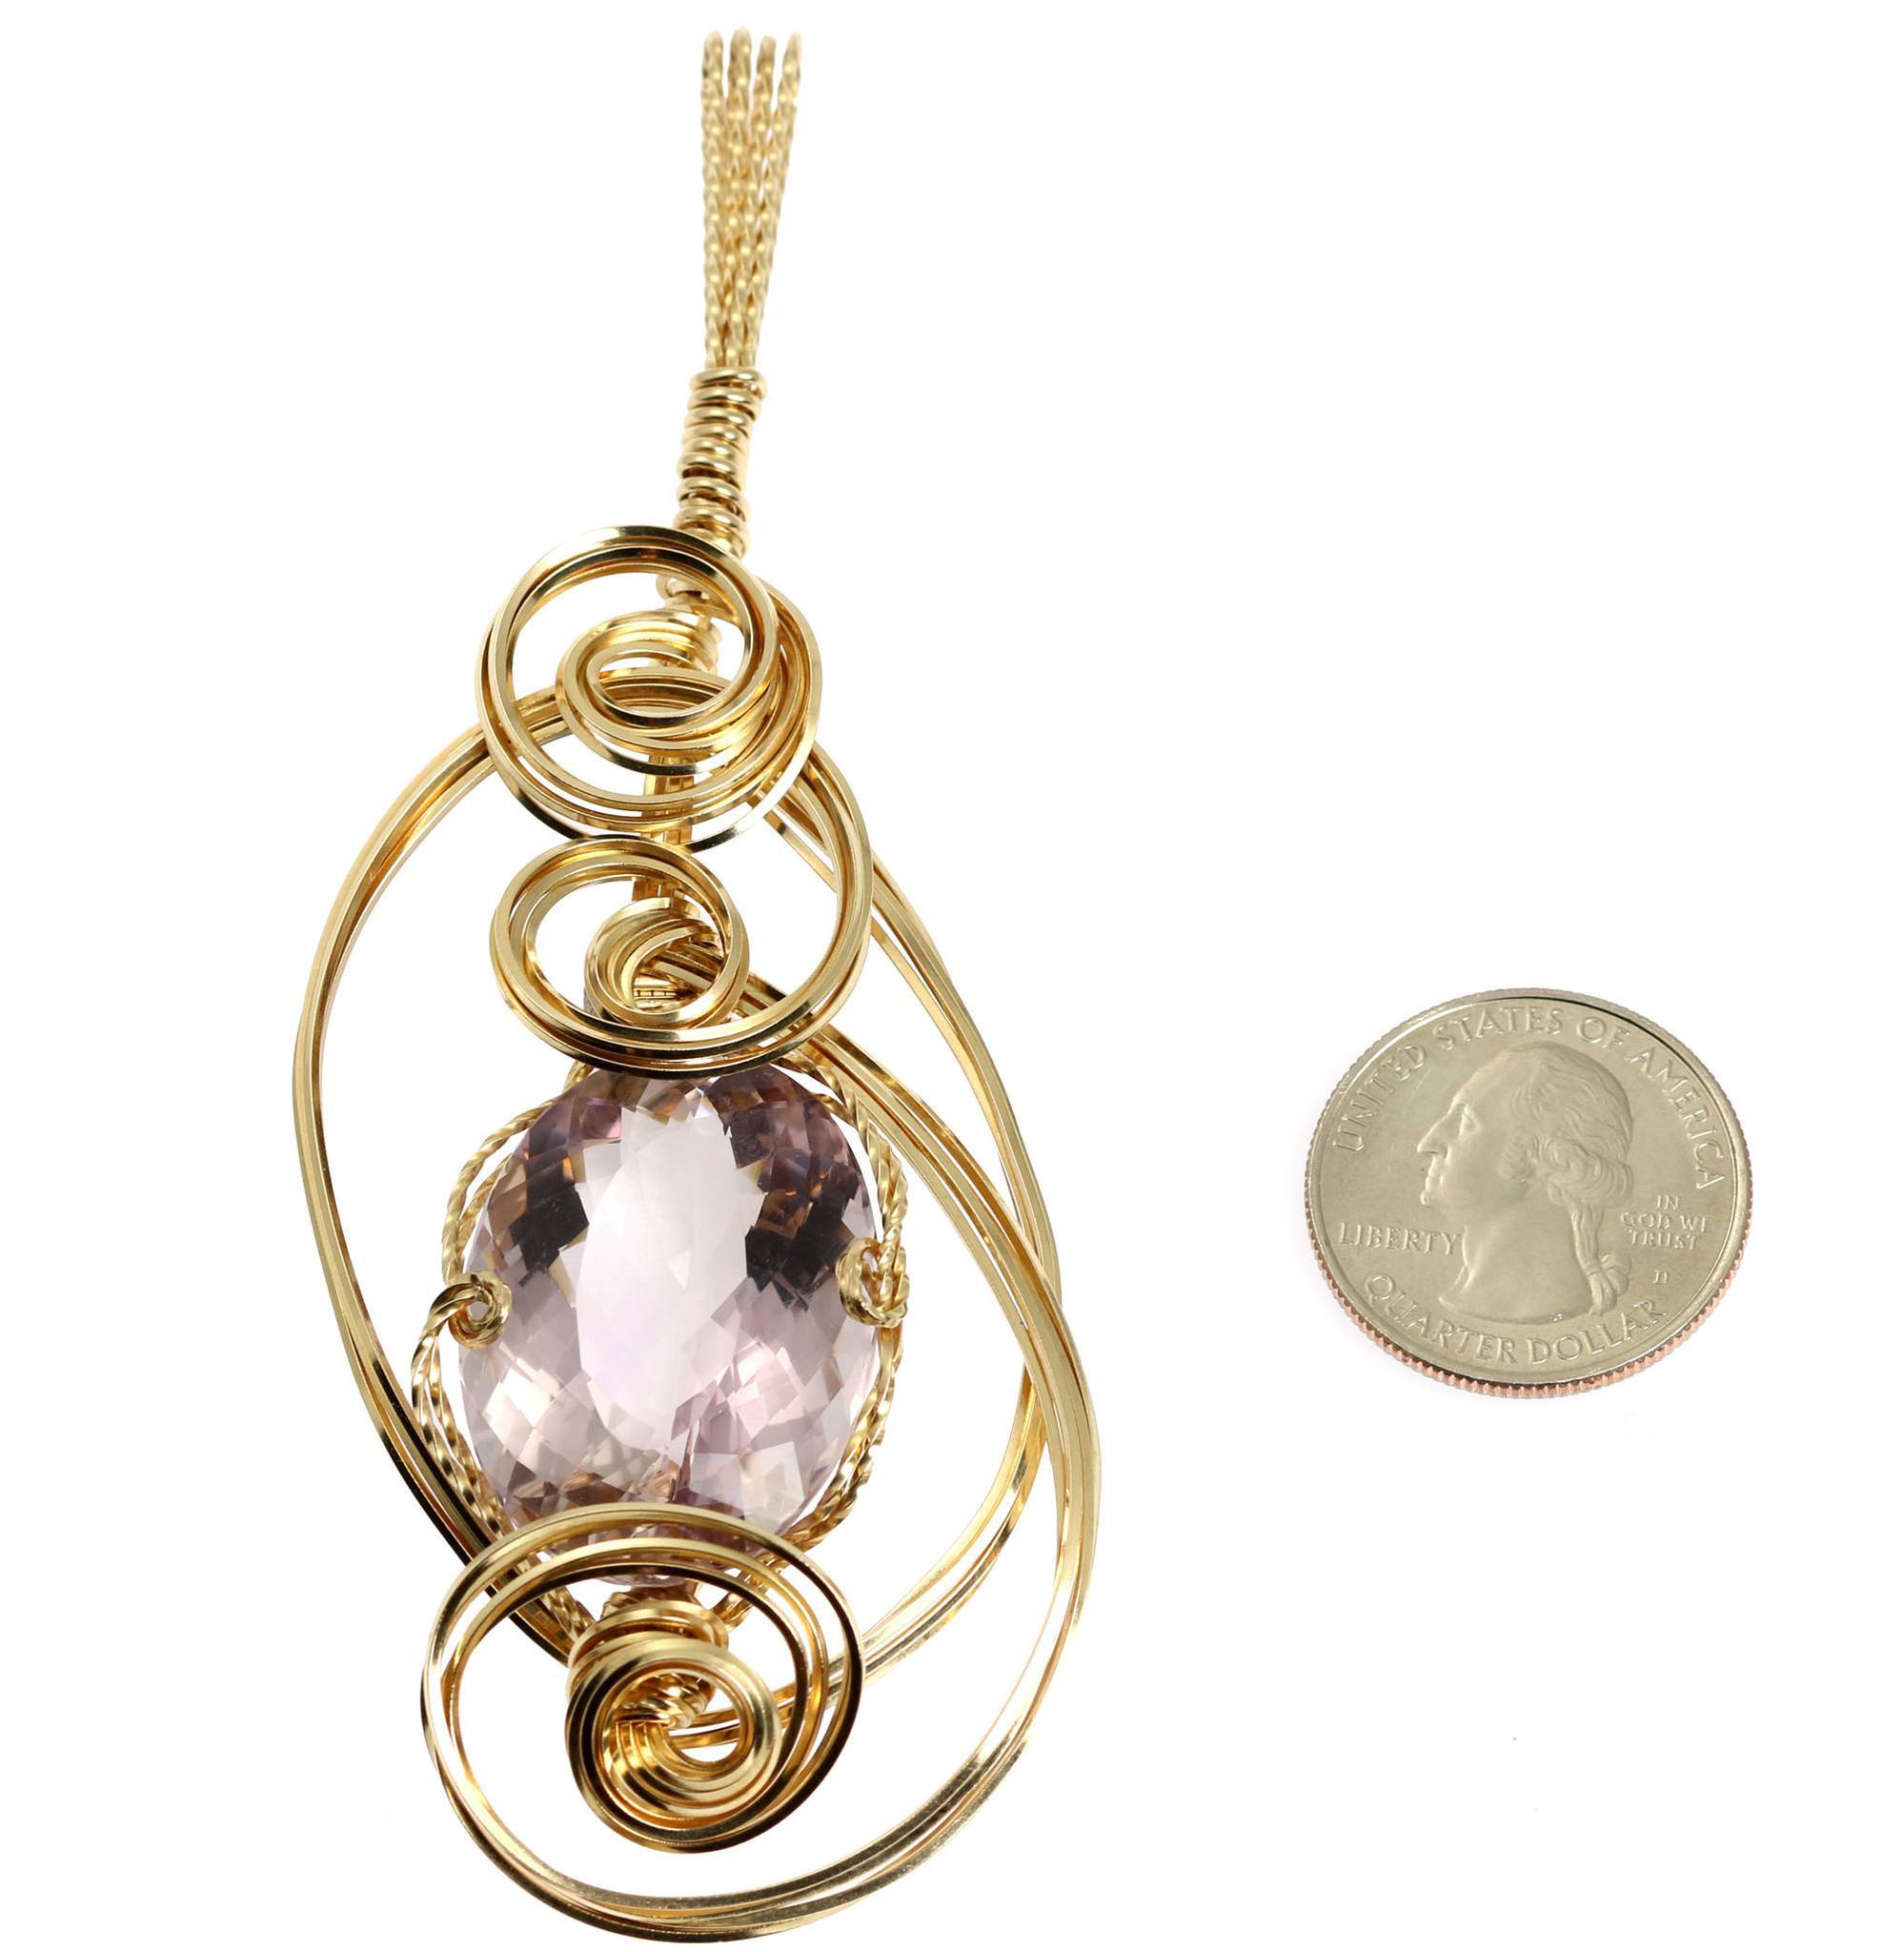 Size of Cushion Cut Amethyst 14K Gold-filled Wrapped Pendant